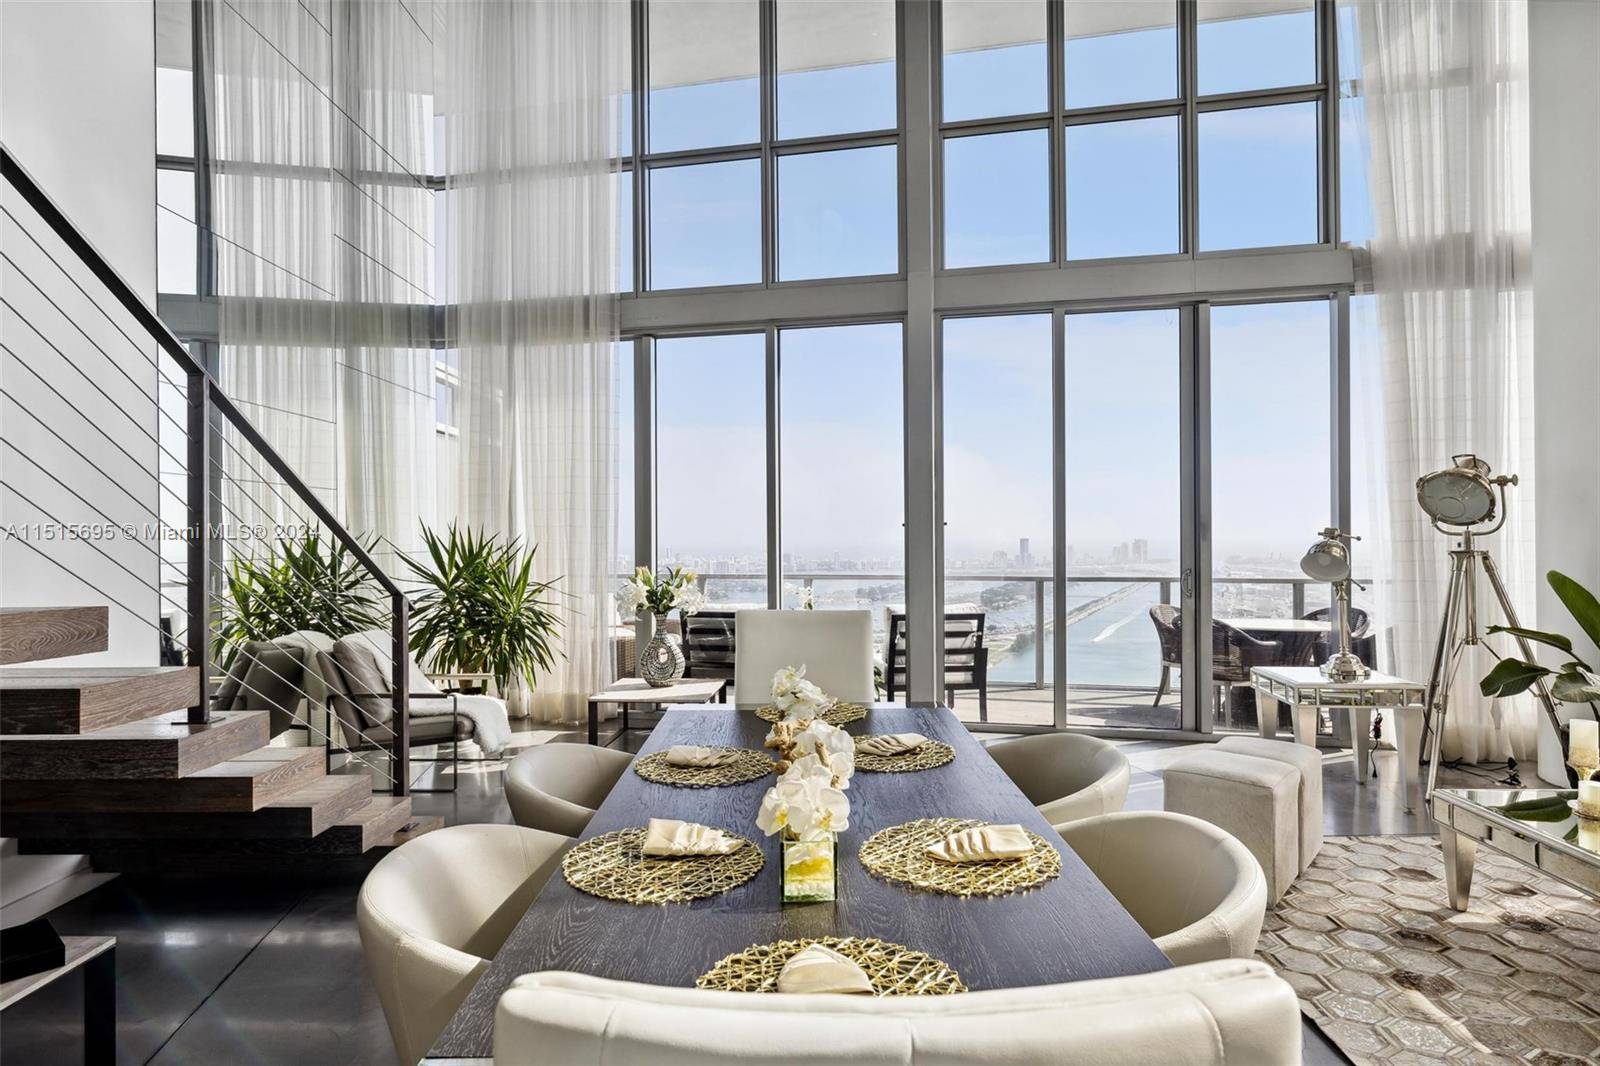 This exceptional 3 level penthouse, perched on the 63rd floor, features 3 bedrooms and 4.